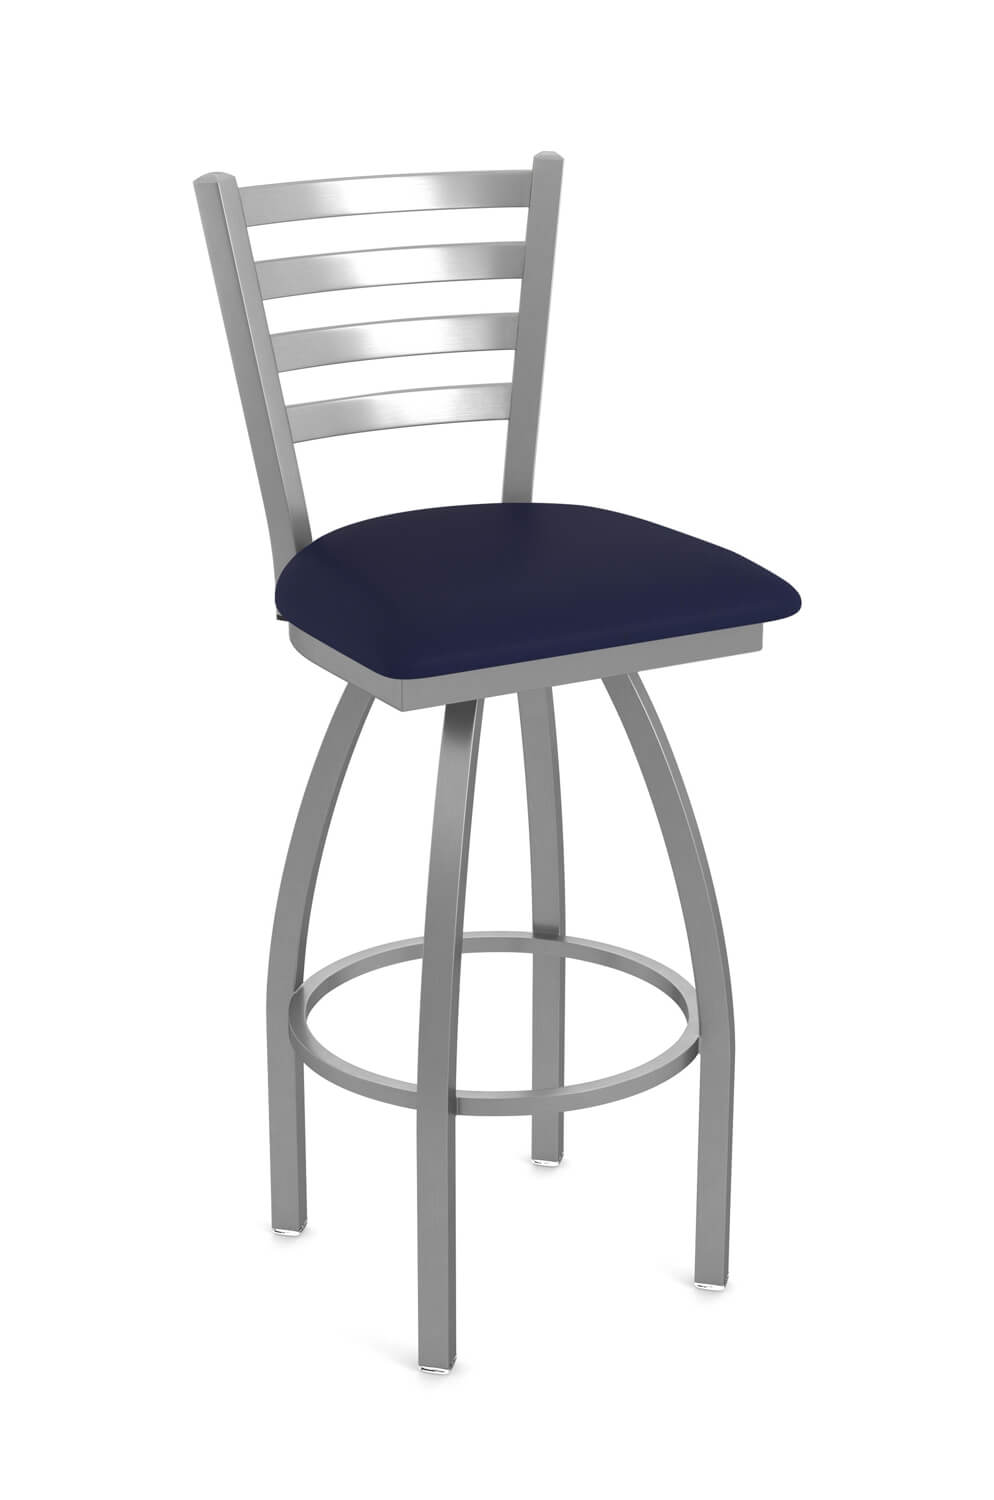 Holland's Jackie Outdoor Stainless Steel Bar Stool in Breeze Sapphire Blue Vinyl Cushion